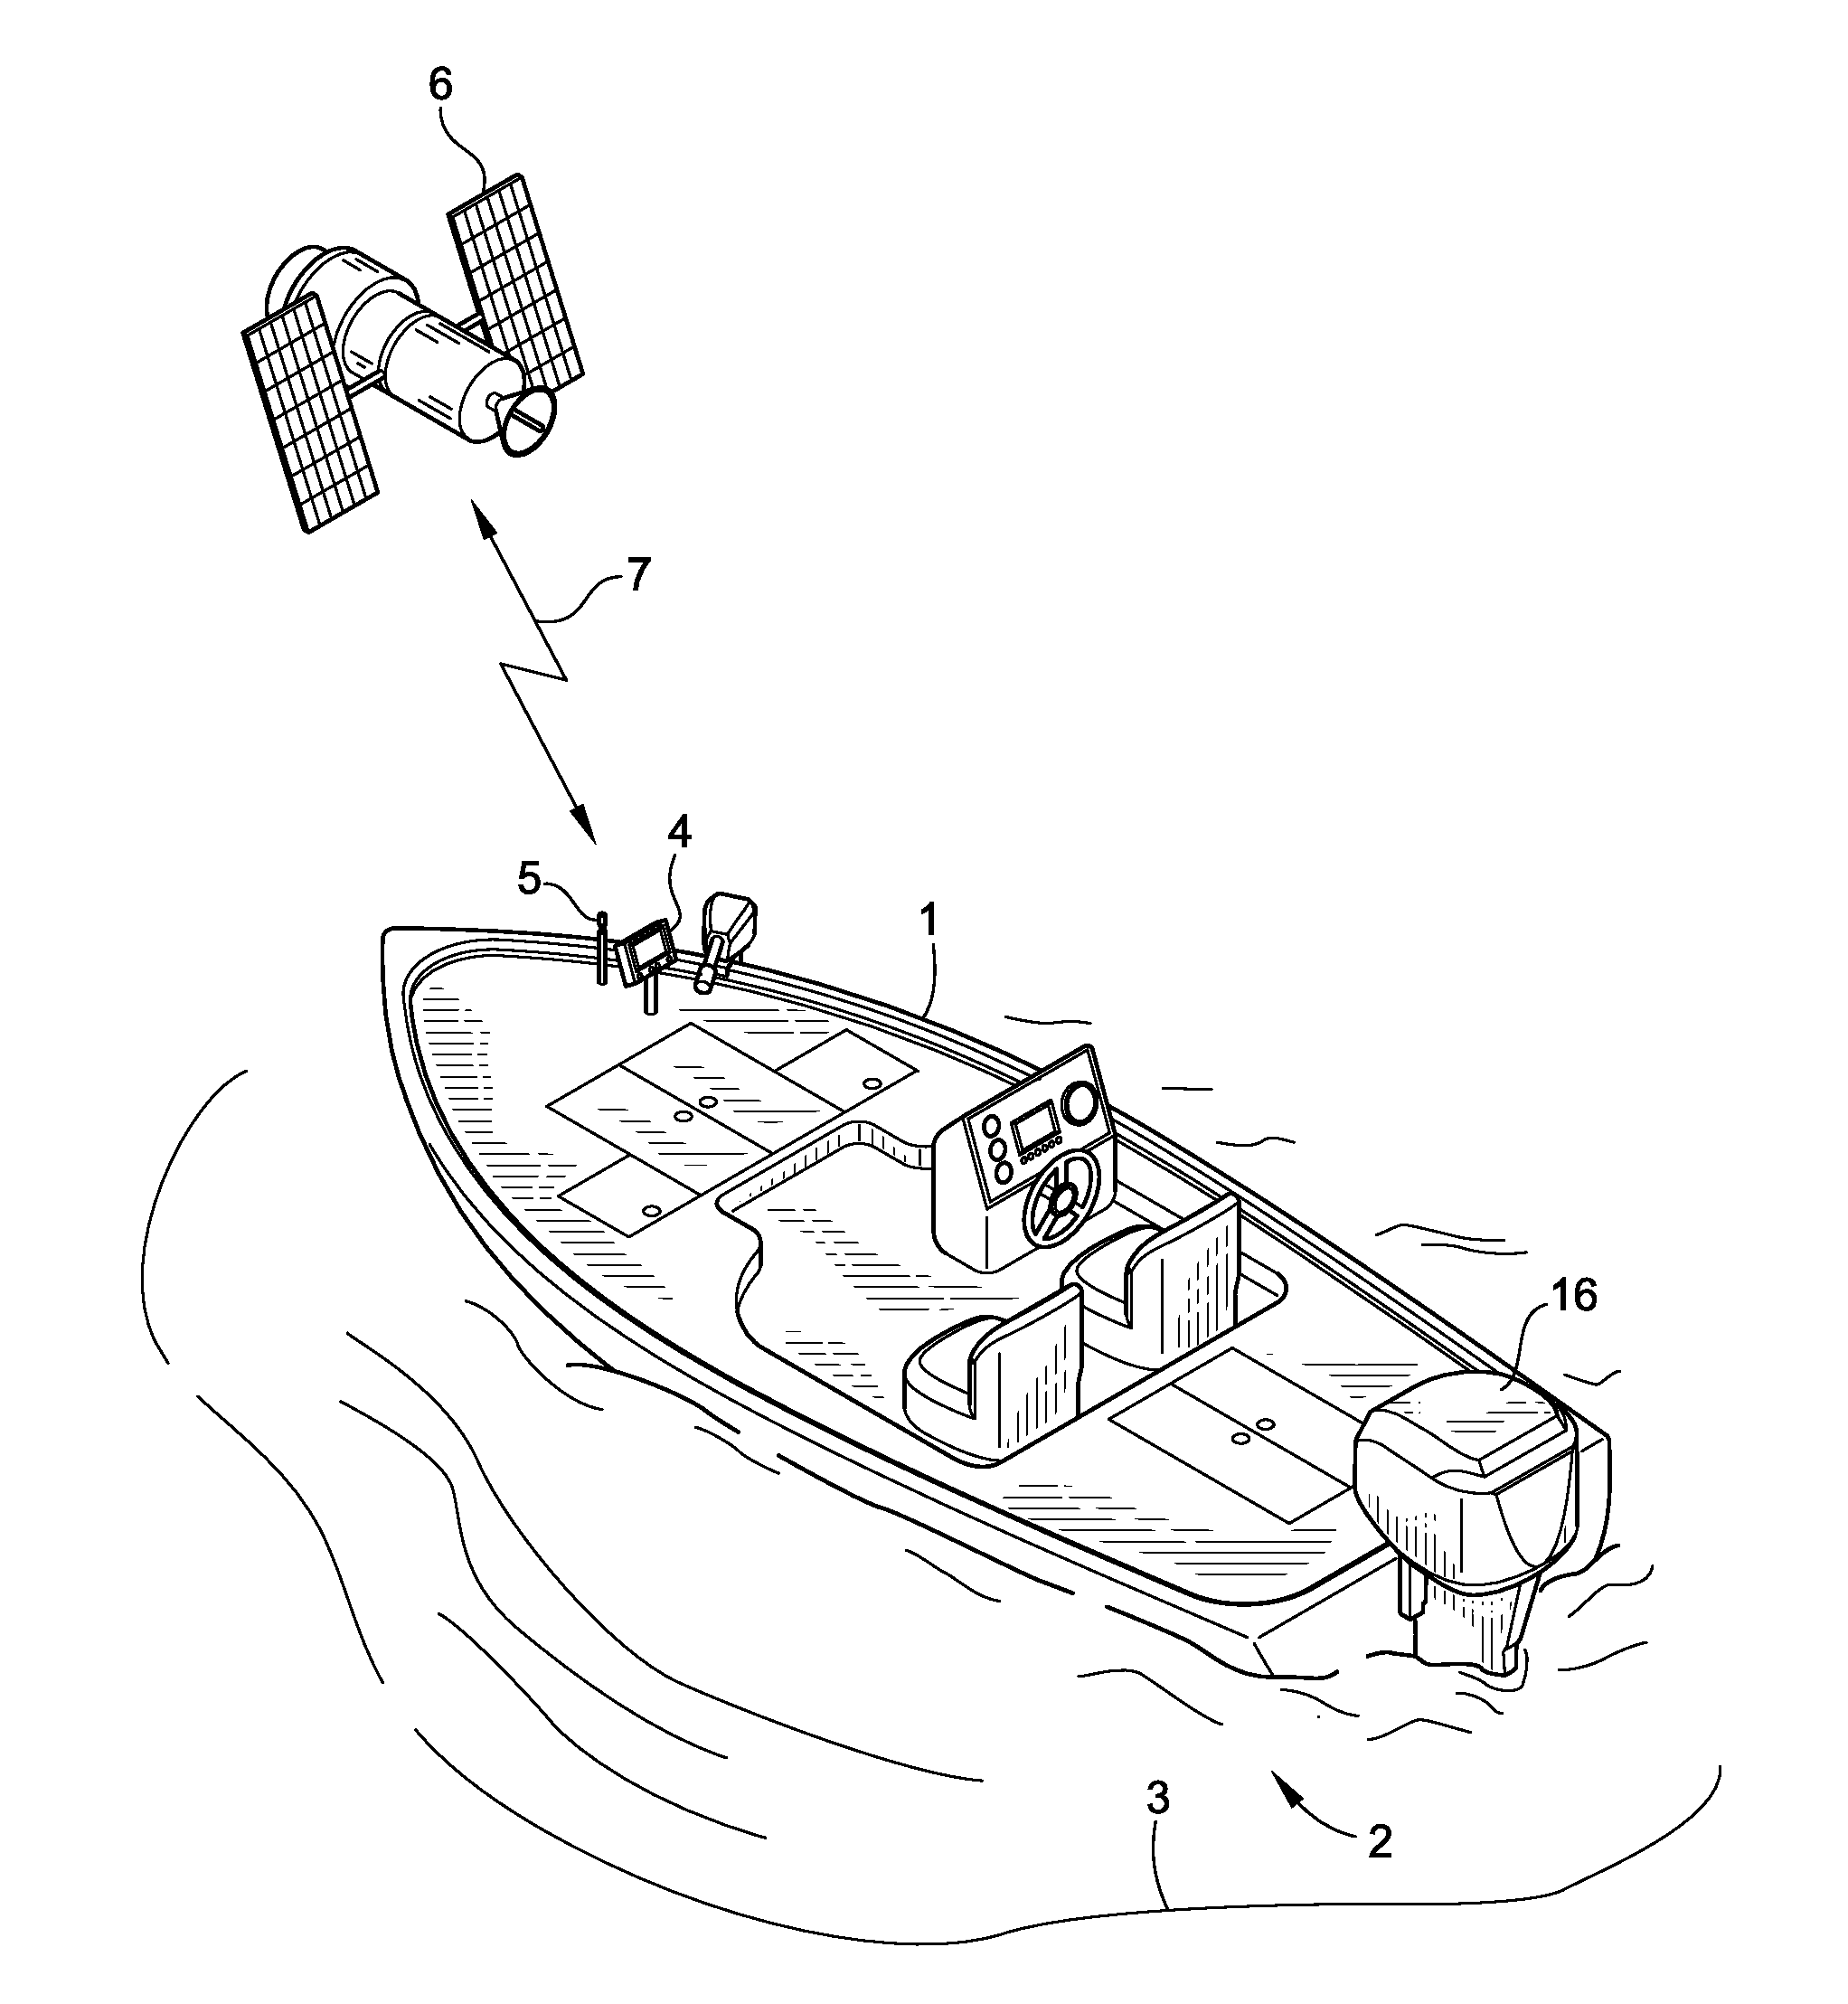 System and Method for Automatically Navigating a Depth Contour